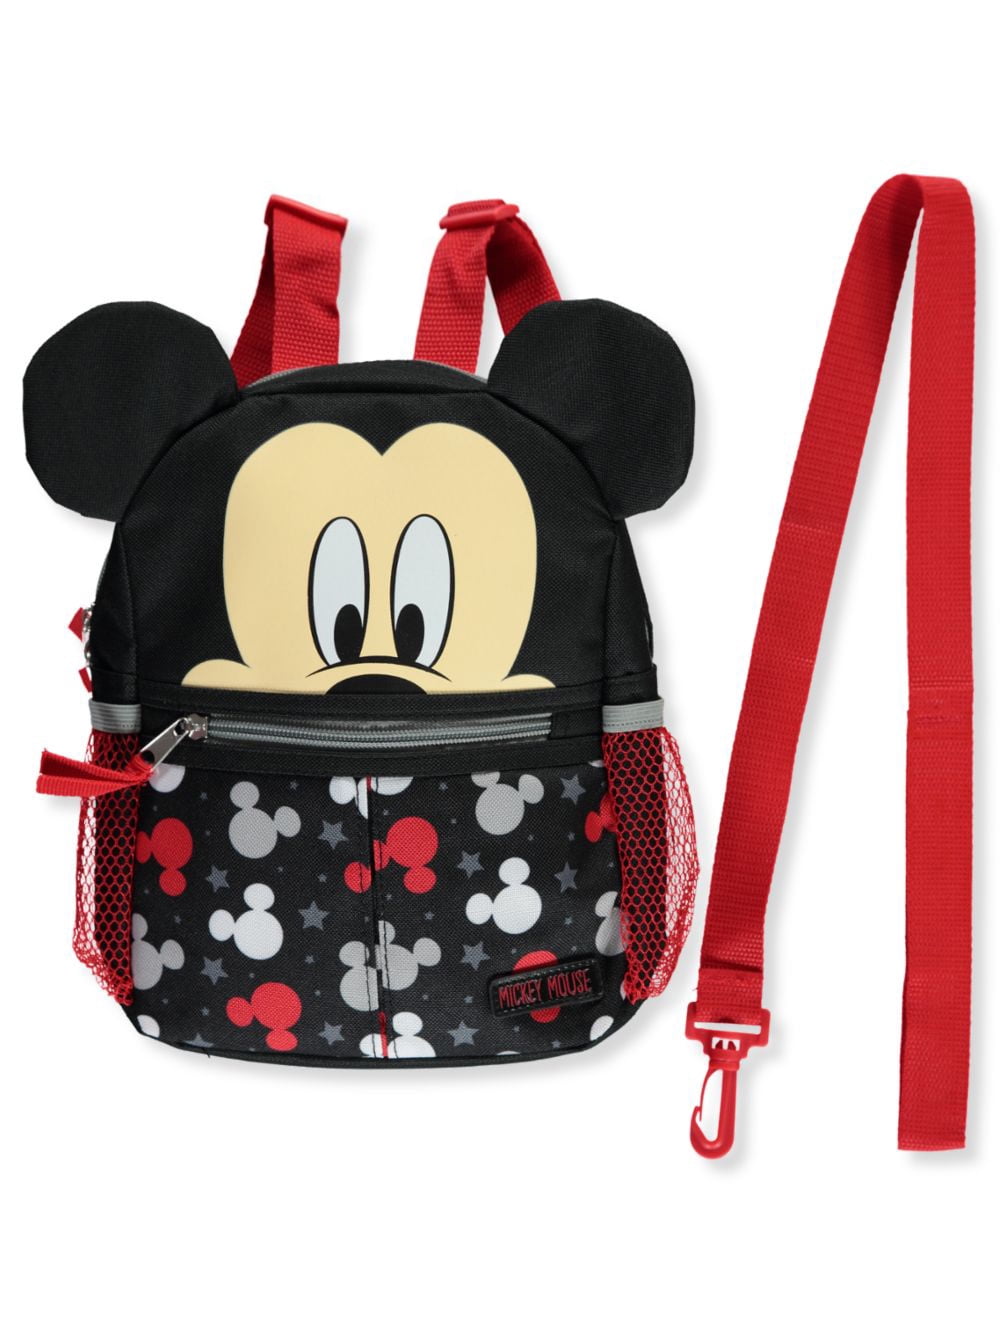 Kids Toddler Baby Cute Mickey Mouse Character Safety Harness Backpack Blue 